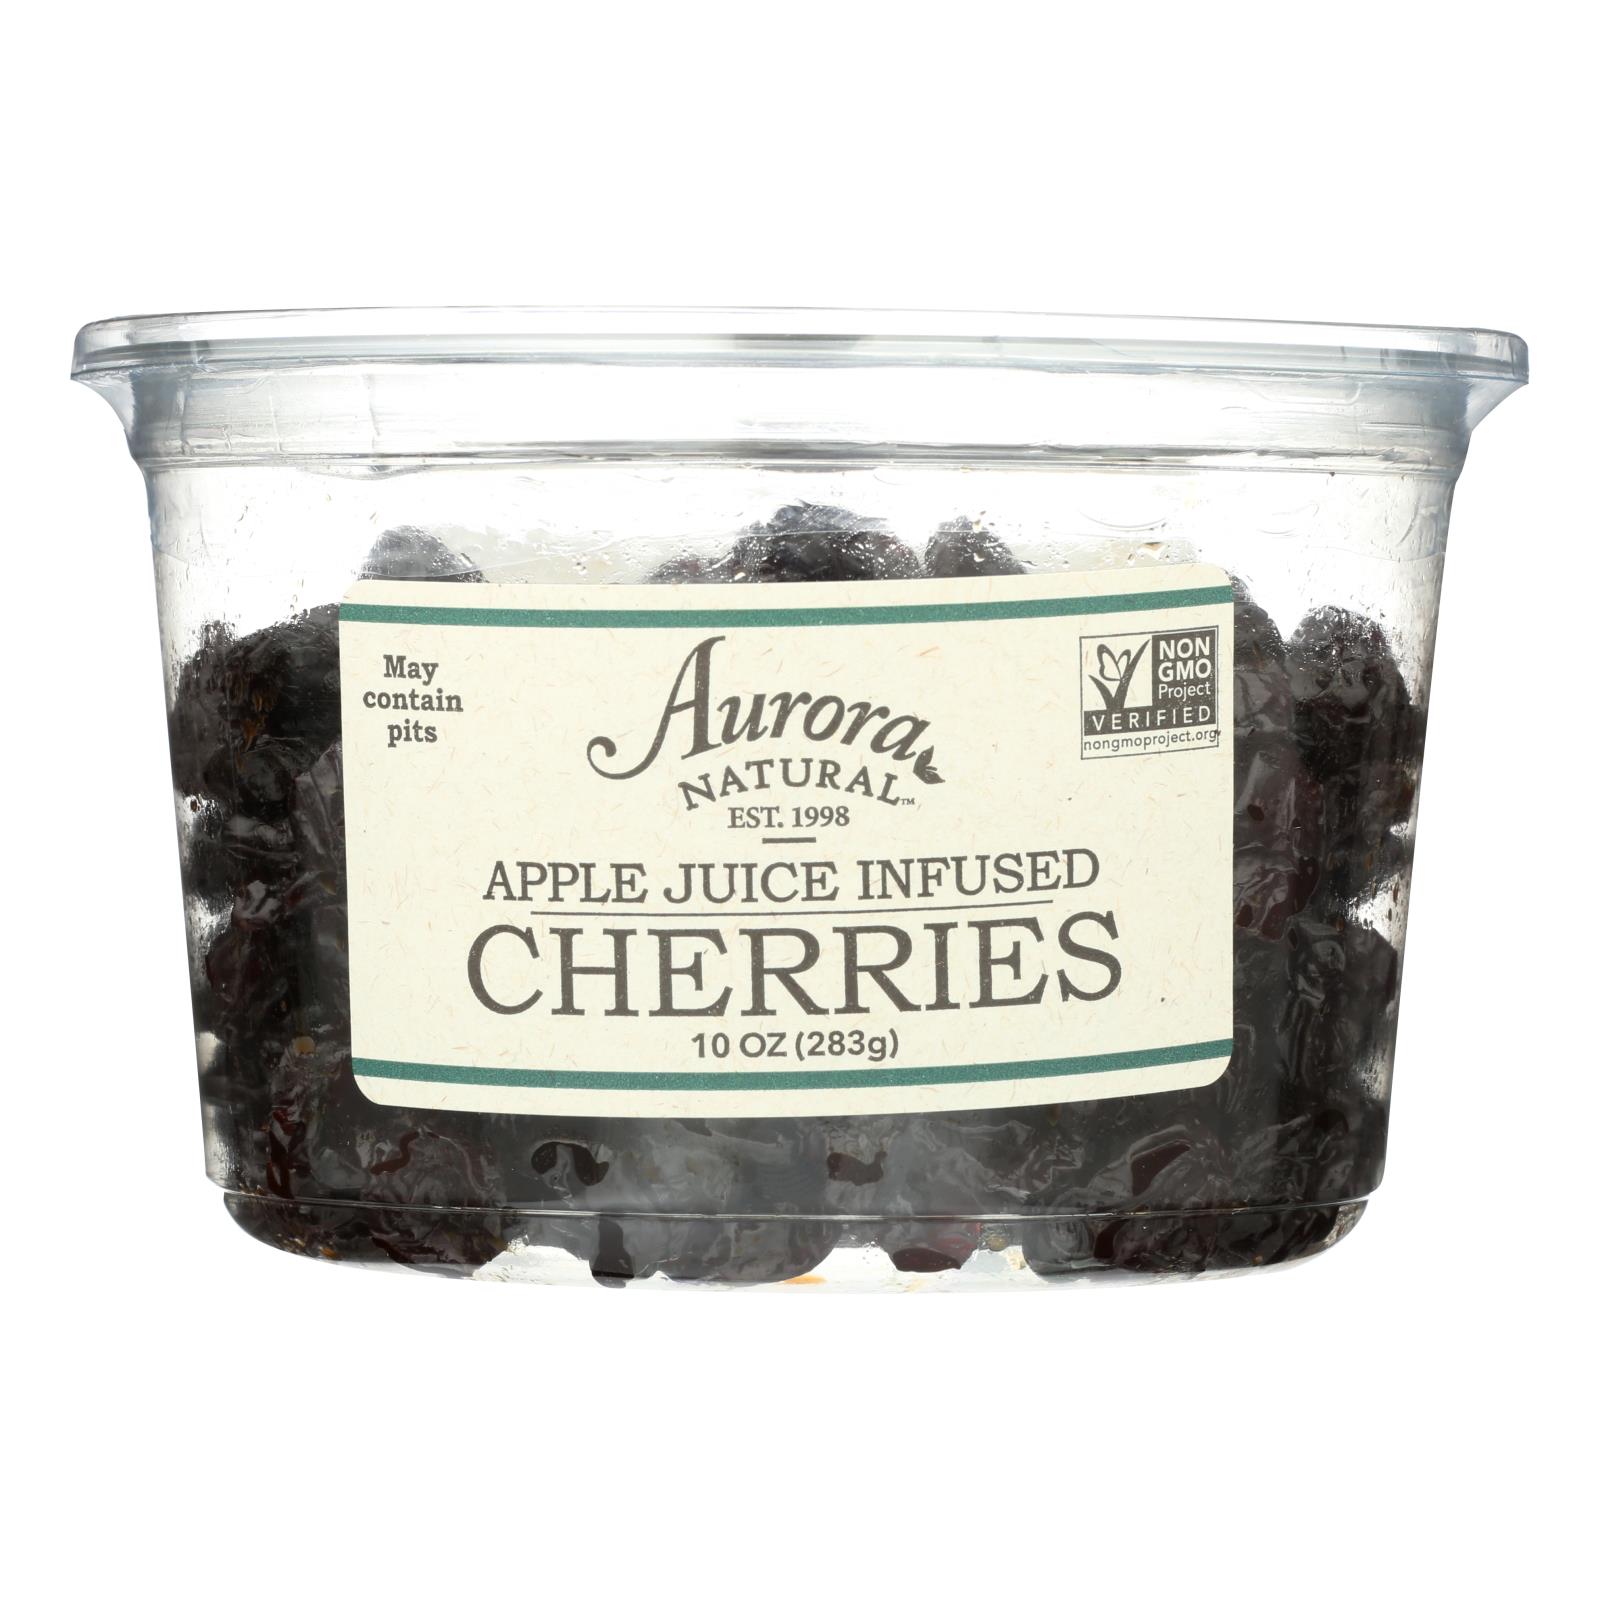 Aurora Natural Products - Apple Juice Infused Cherries - 12개 묶음상품 - 10 oz.